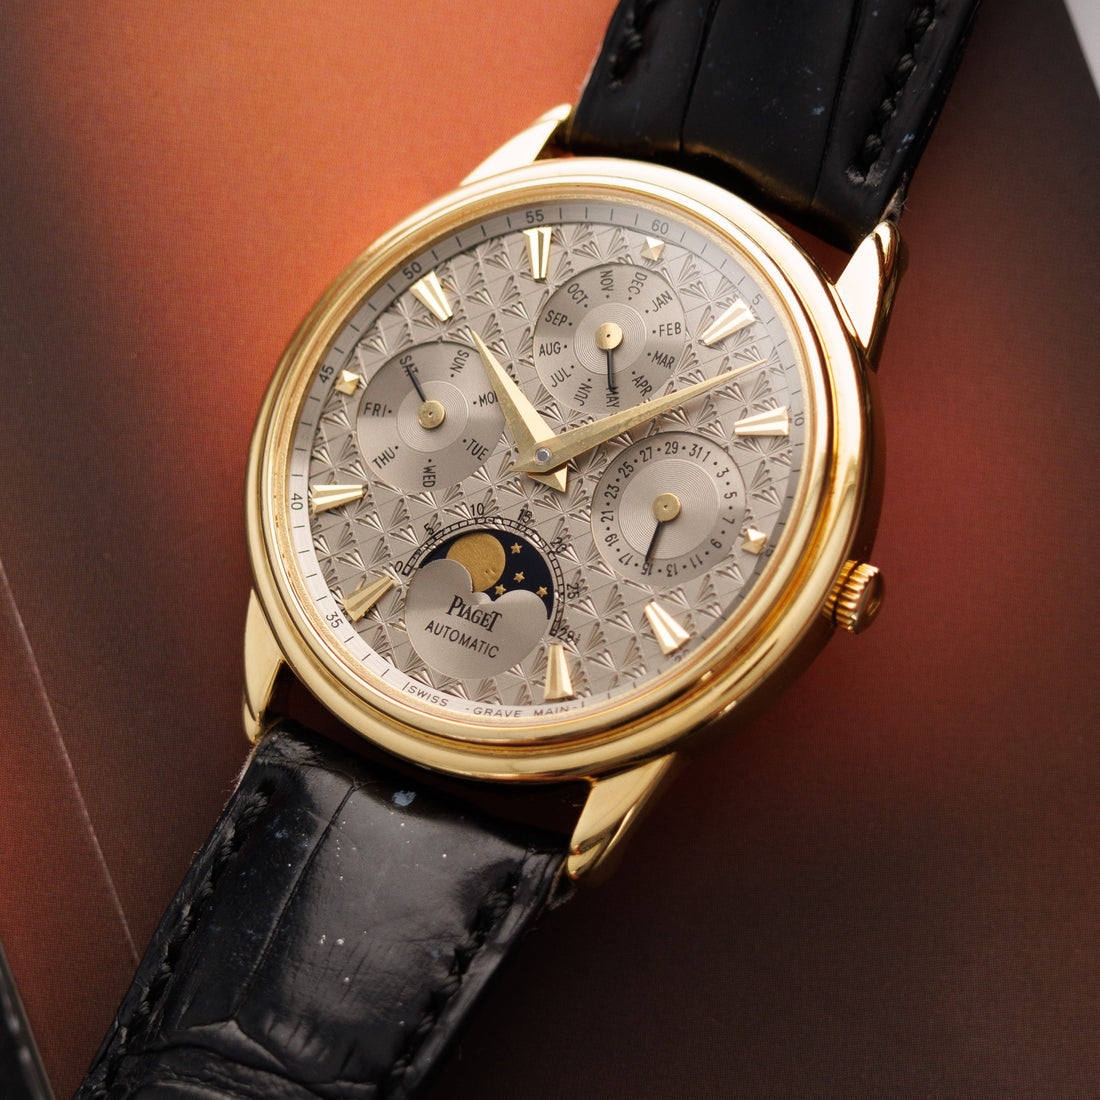 Piaget Yellow Gold Gouverneur Triple Calendar Ref. 15958 with Rare Textured Dial